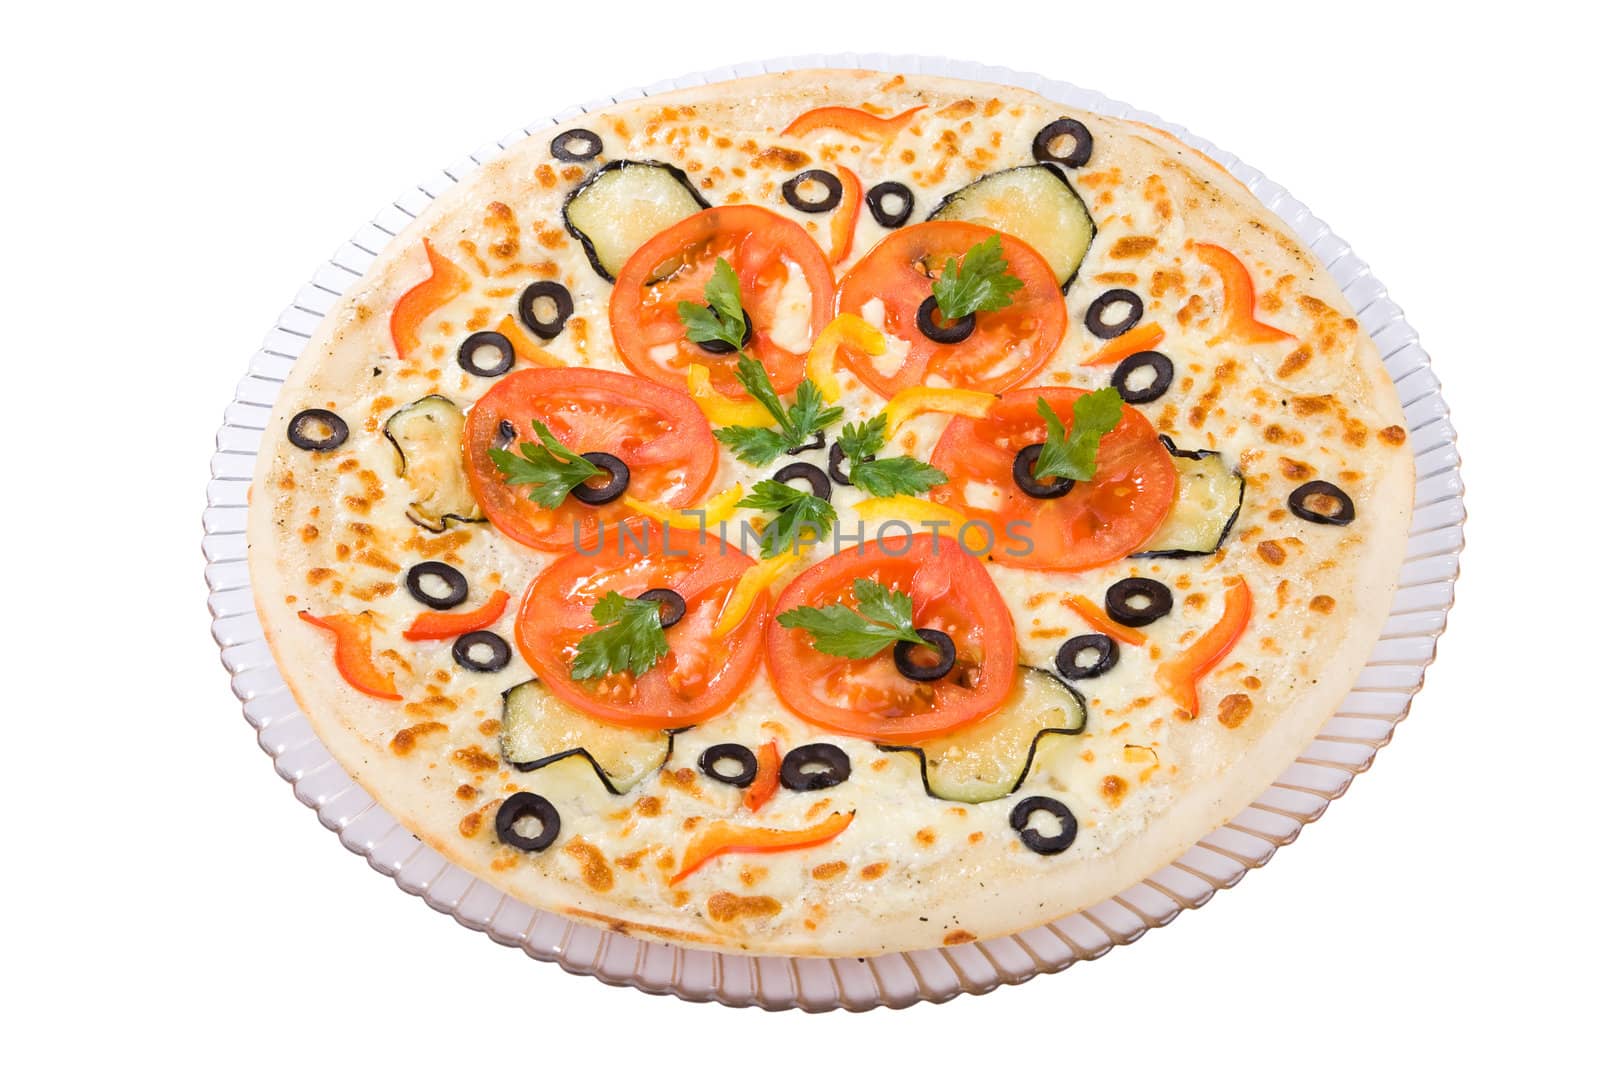 The top view on the Vegetarian Pizza